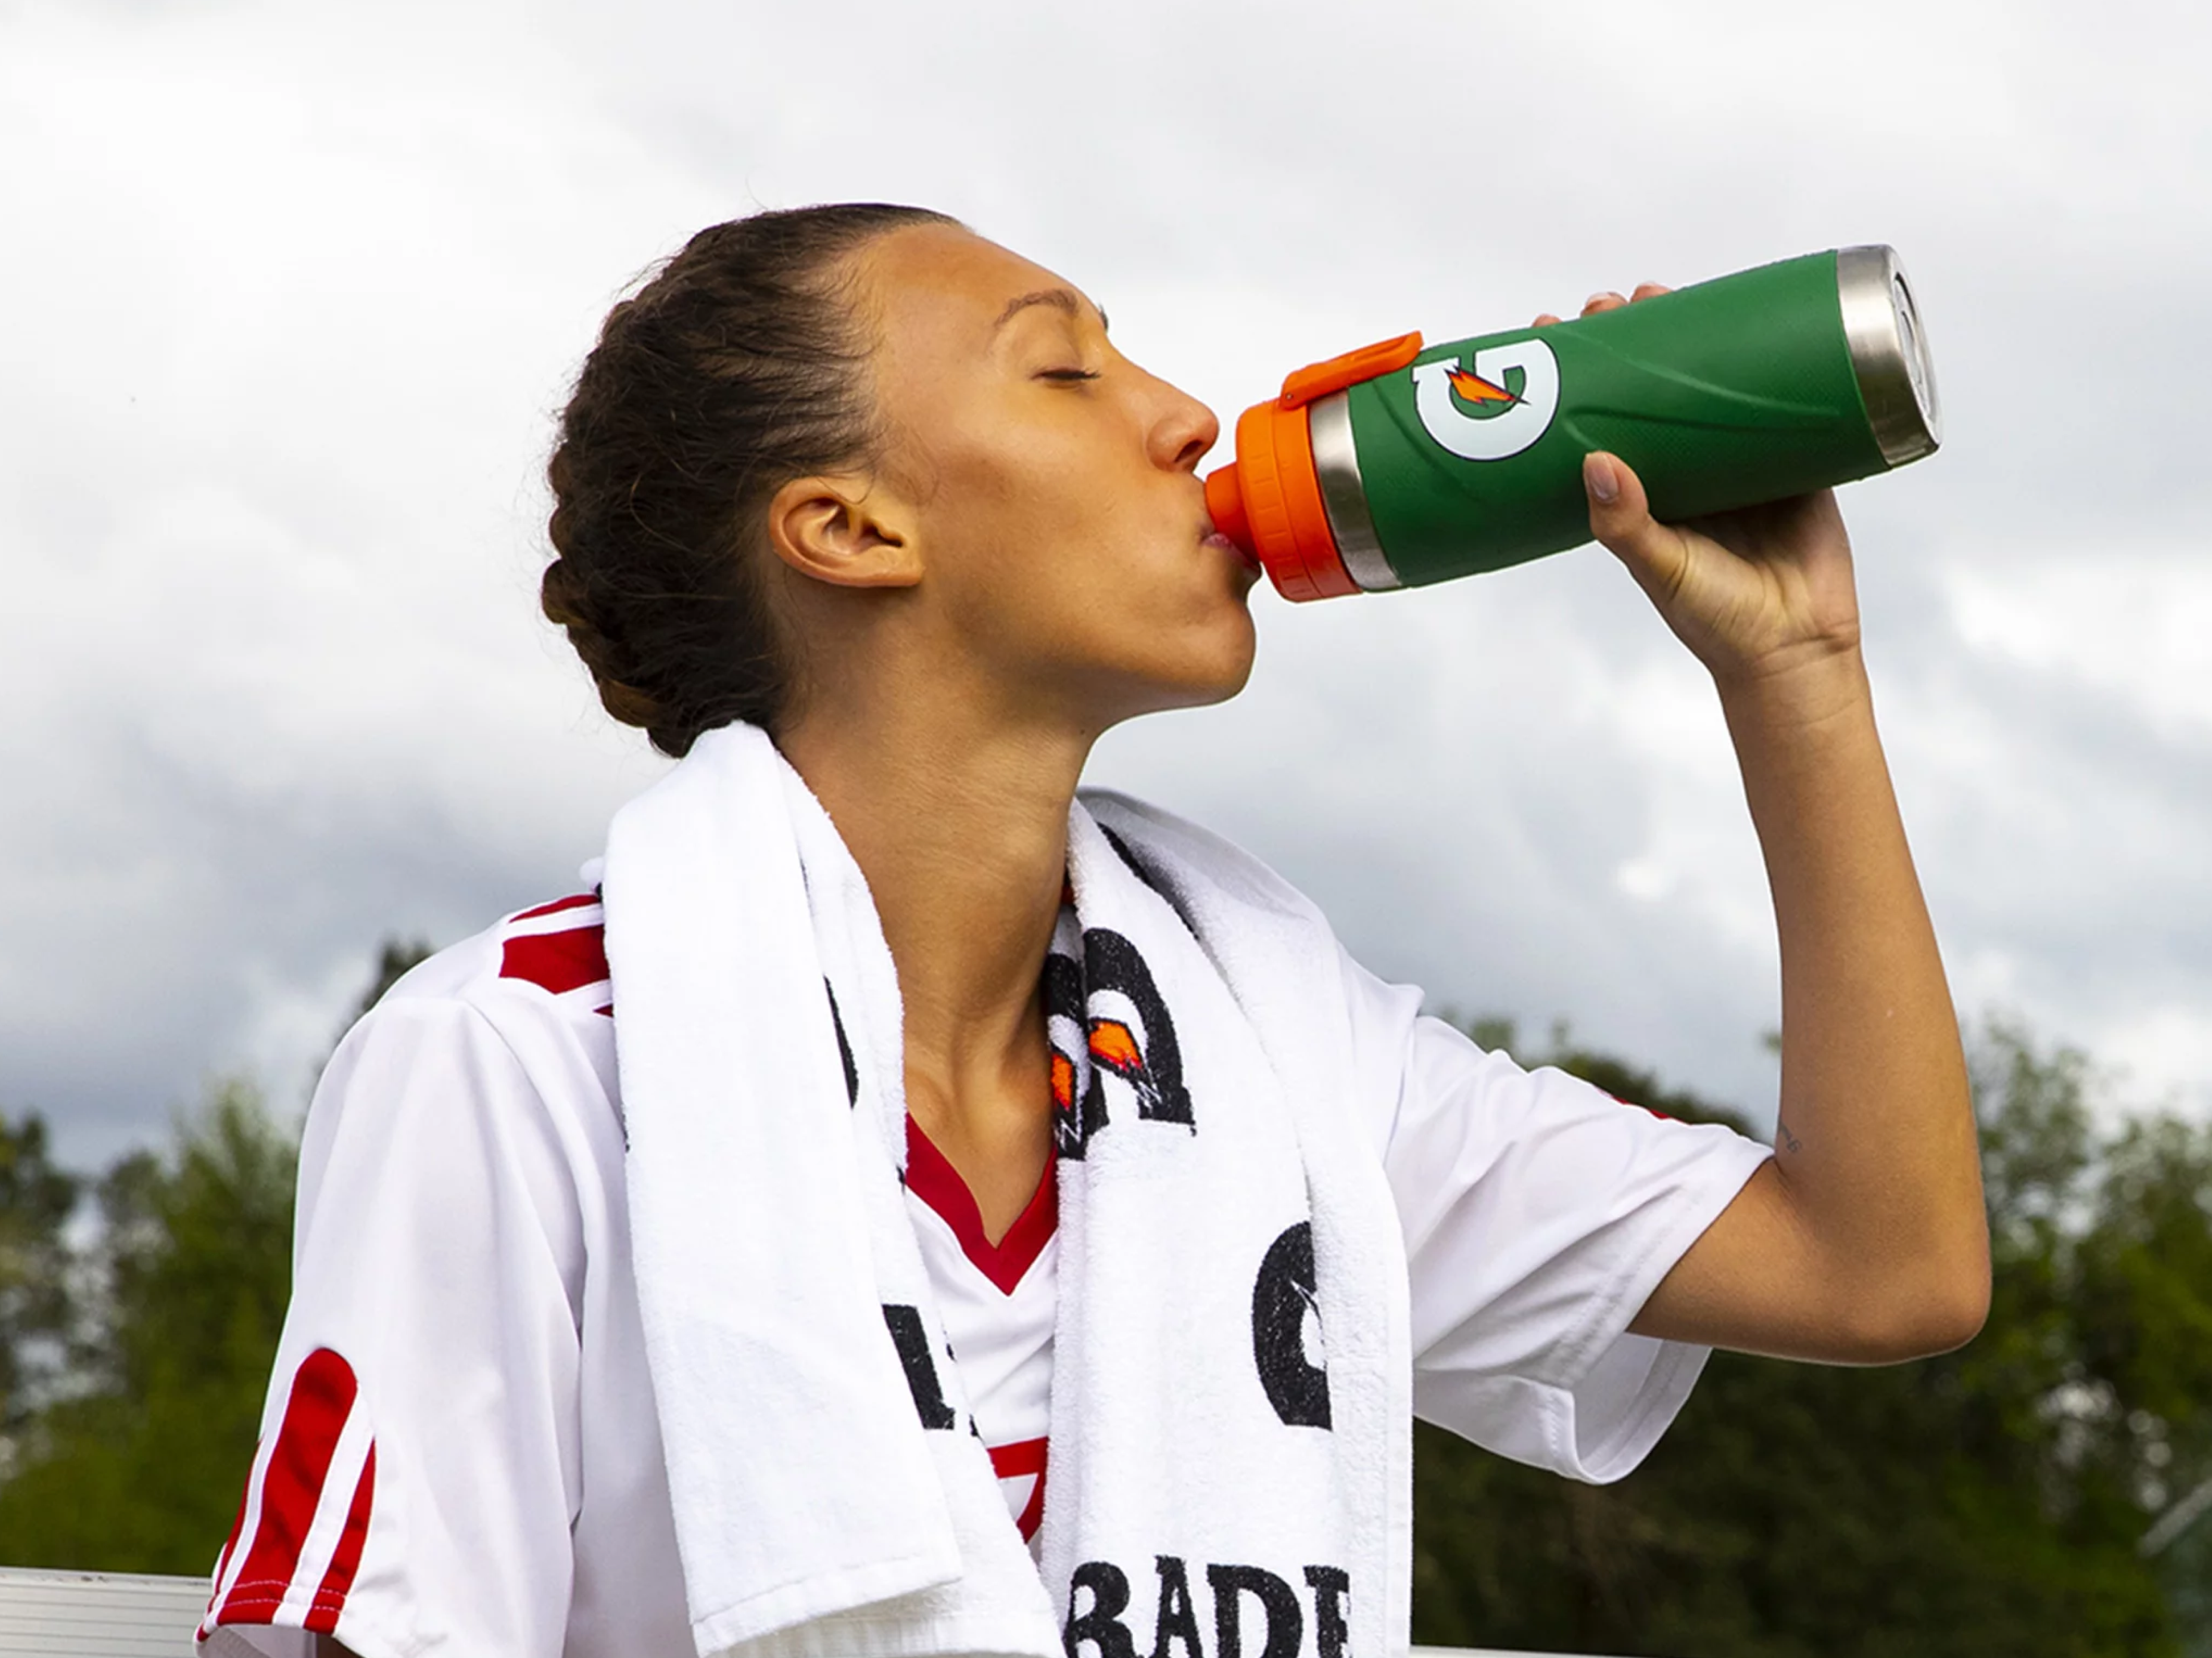 Athlete drinking out of green stainless steel bottle